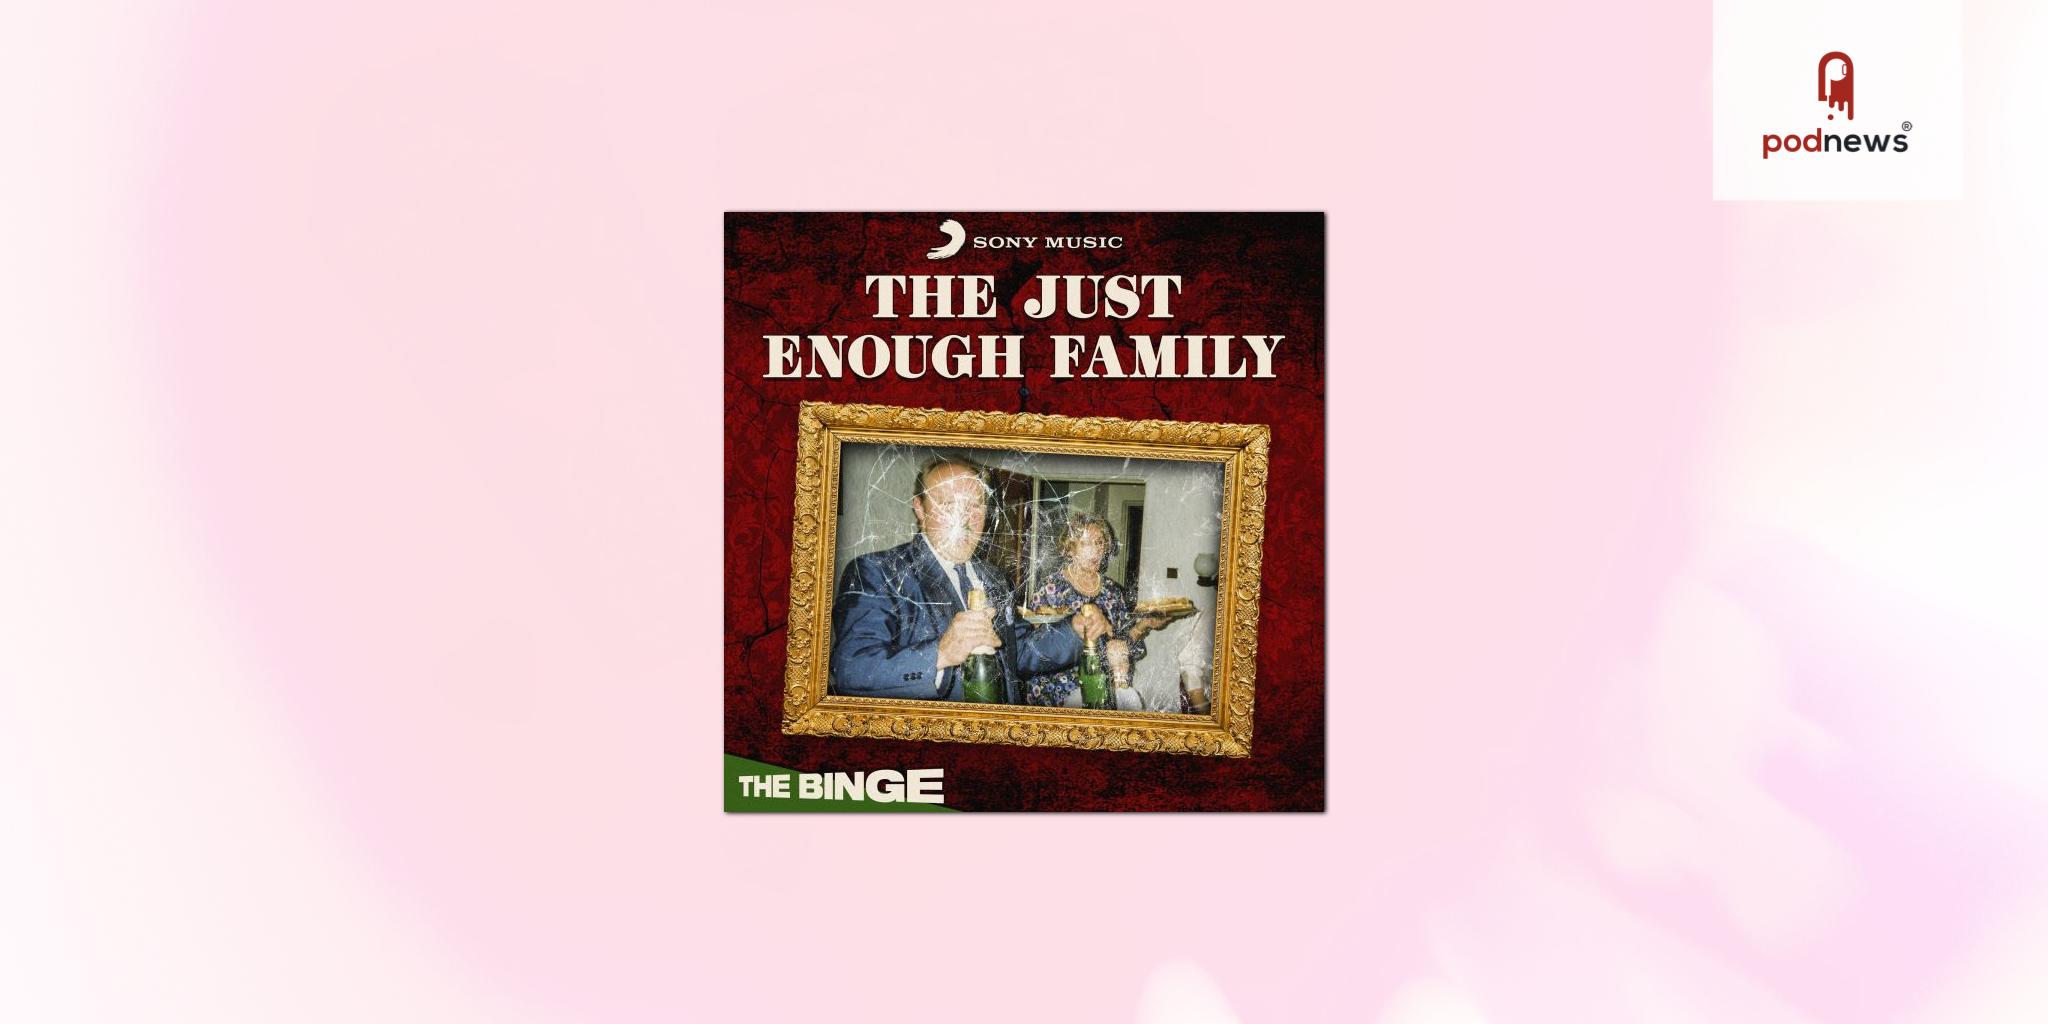 The Just Enough Family explores new money and old secrets